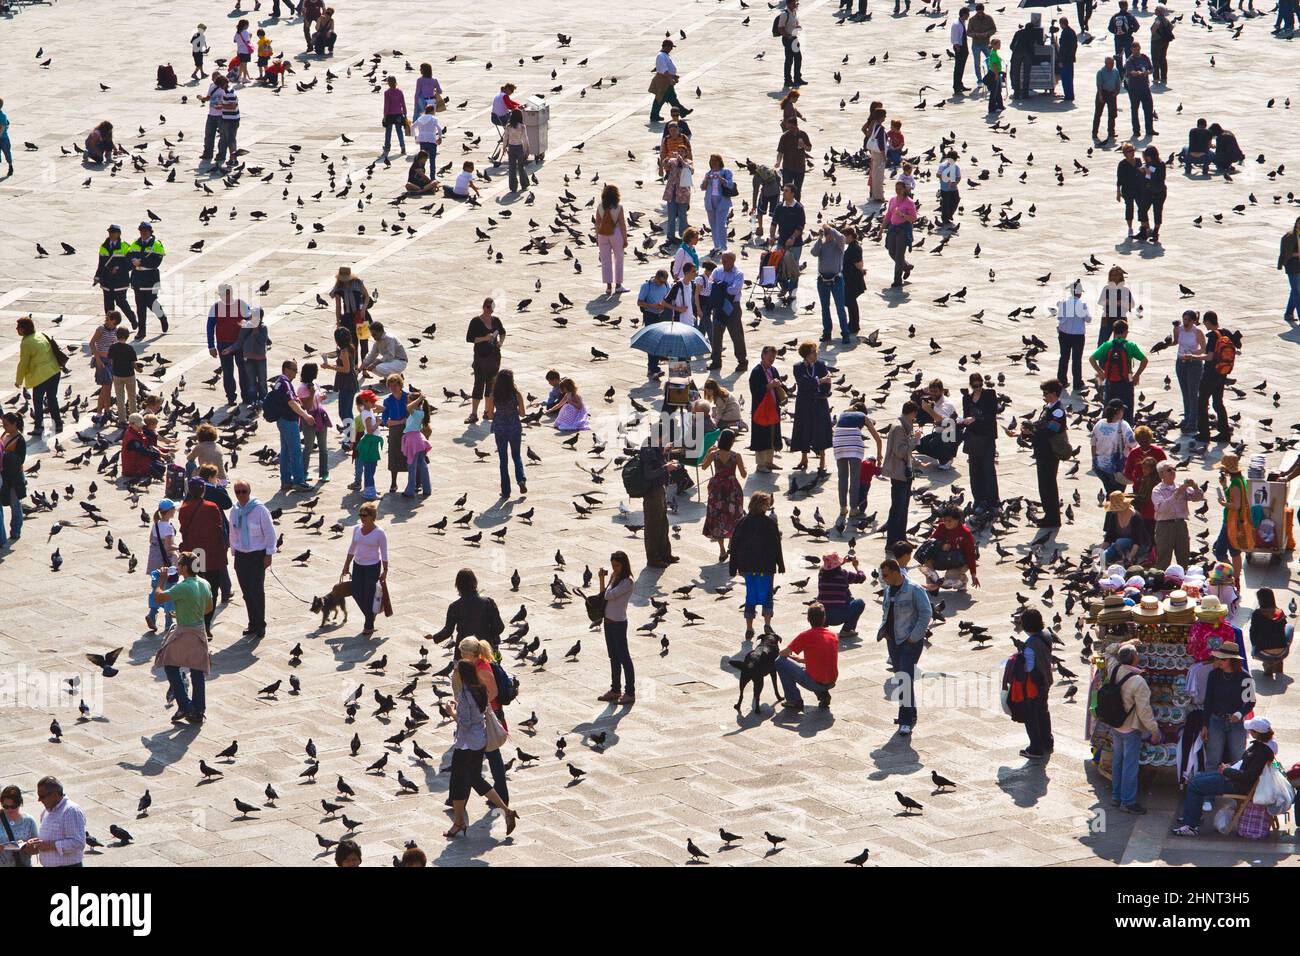 Tourists on San Marco square feed large flock of pigeons Stock Photo